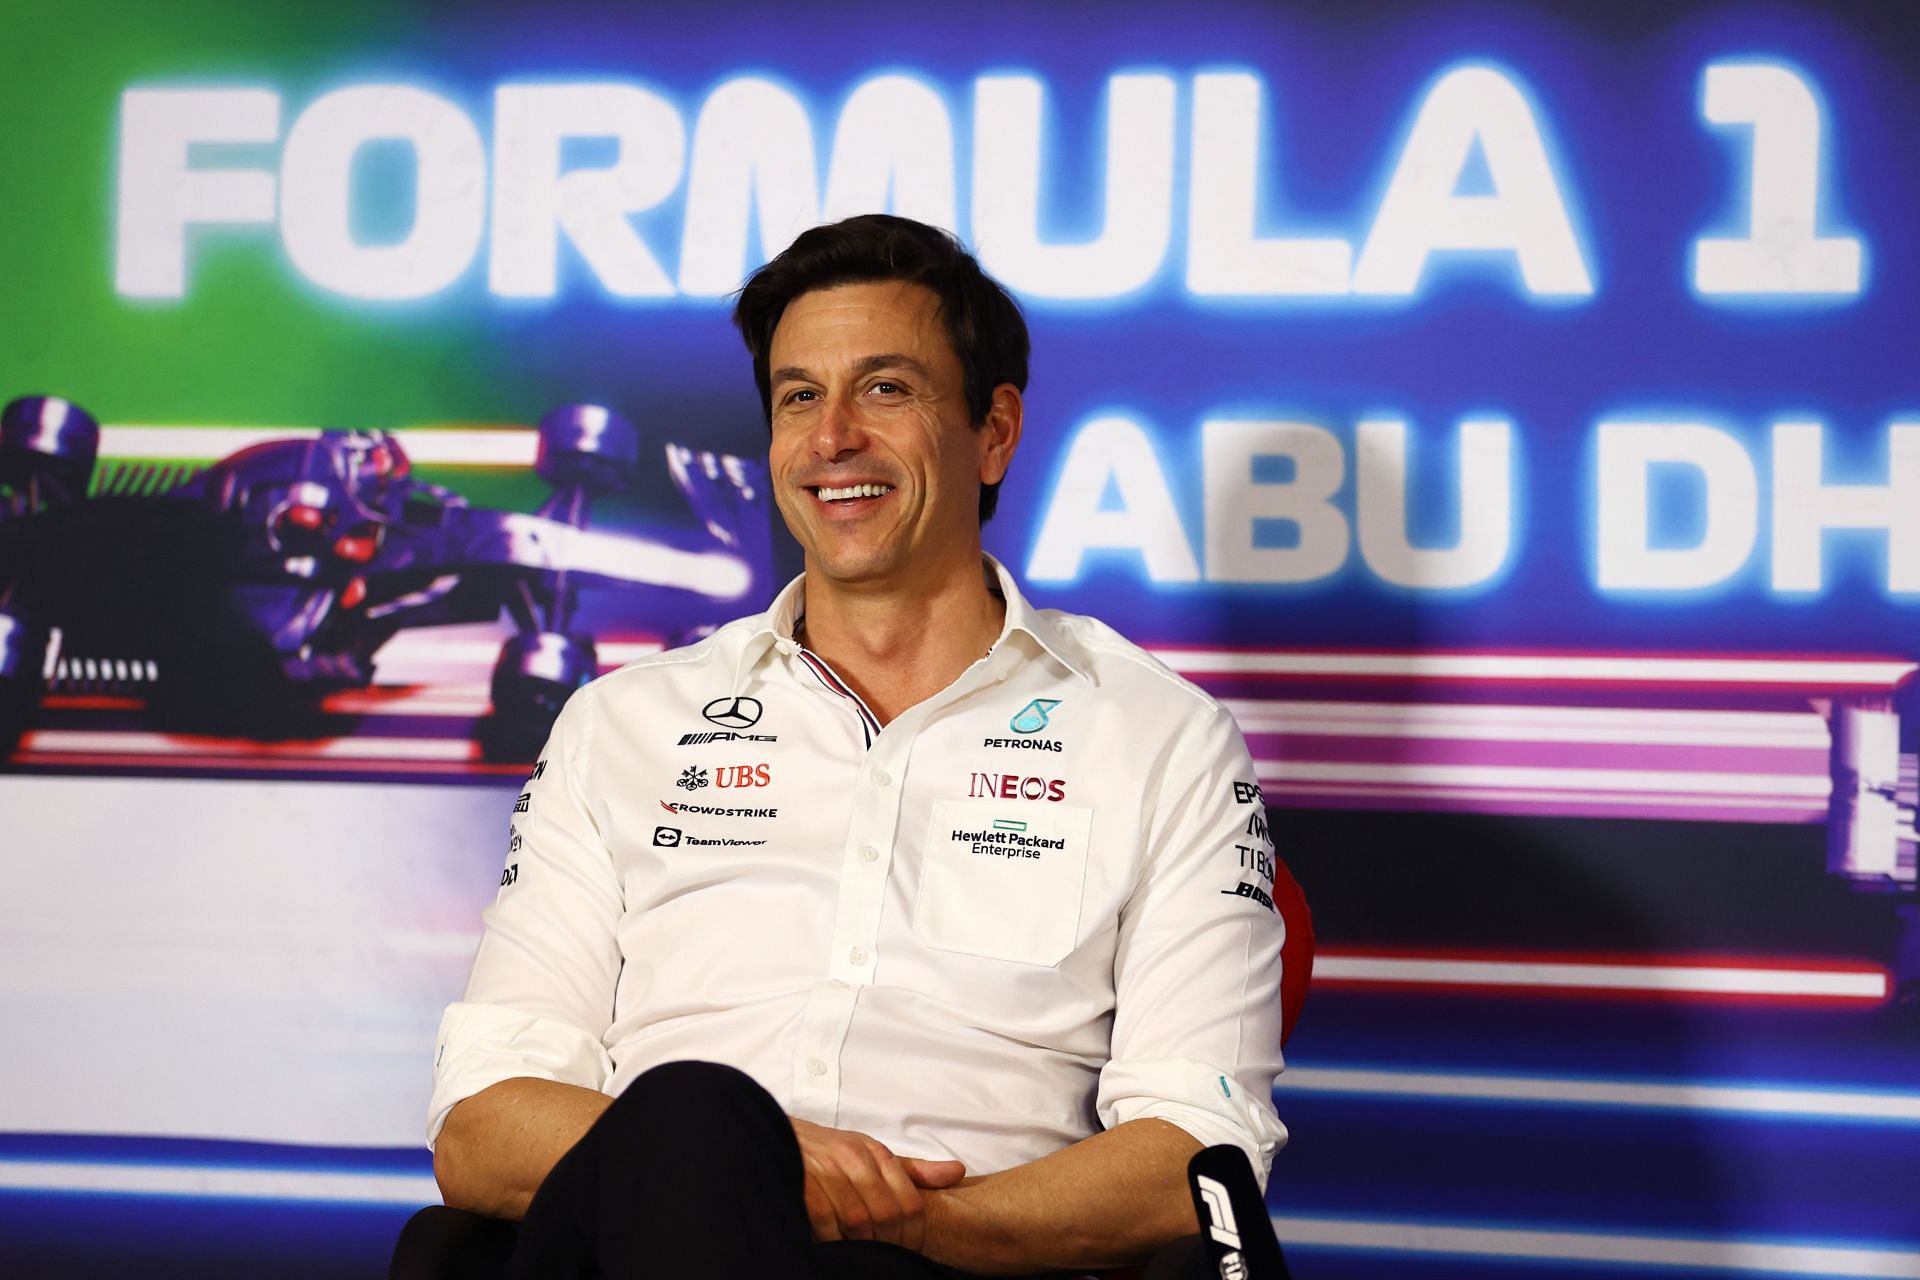 F1 Grand Prix of Abu Dhabi - Toto Wolff speaks to the press